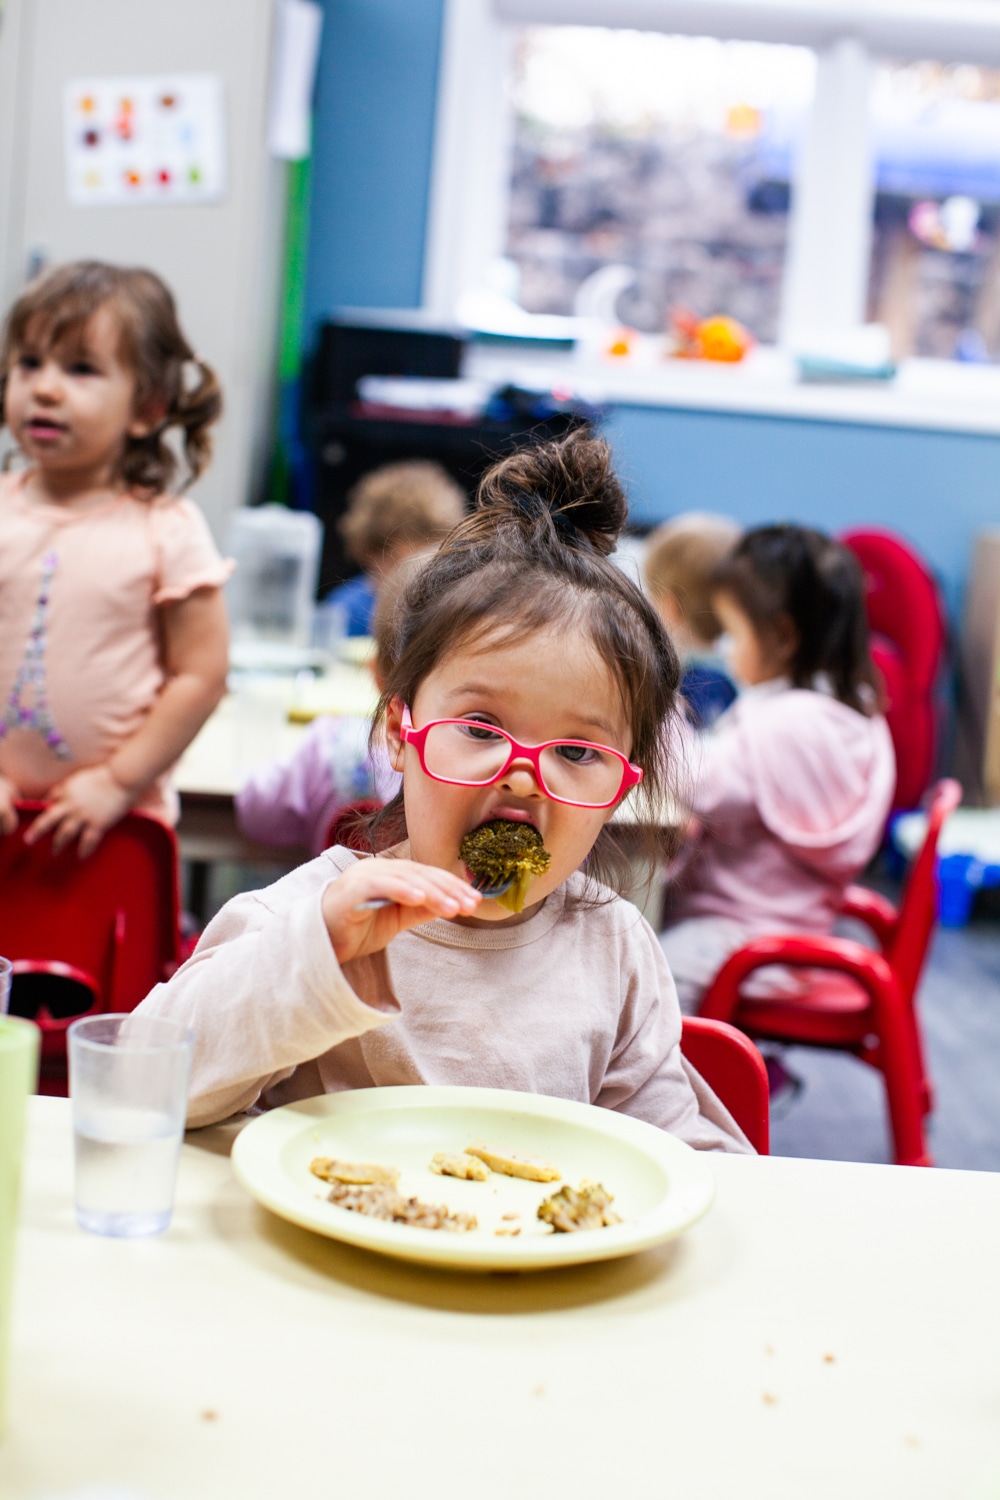 Girl with pink glasses eating broccoli